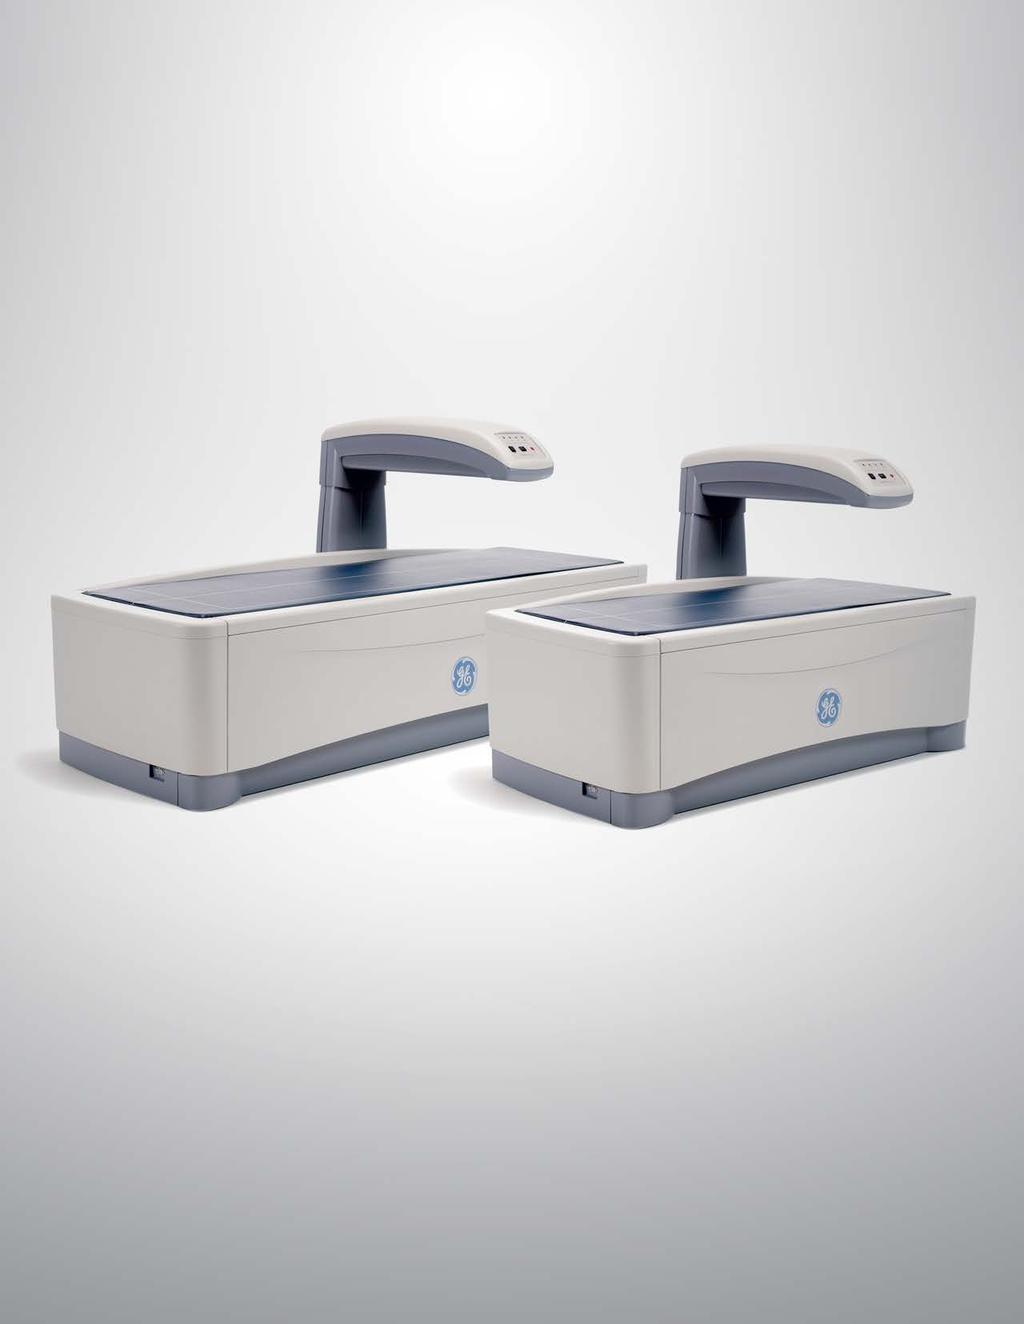 Prodigy High performance, efficient and reliable DXA system with the versatility to offer bone density test and body composition analysis and the flexibility to scale up to a wide-range of clinical